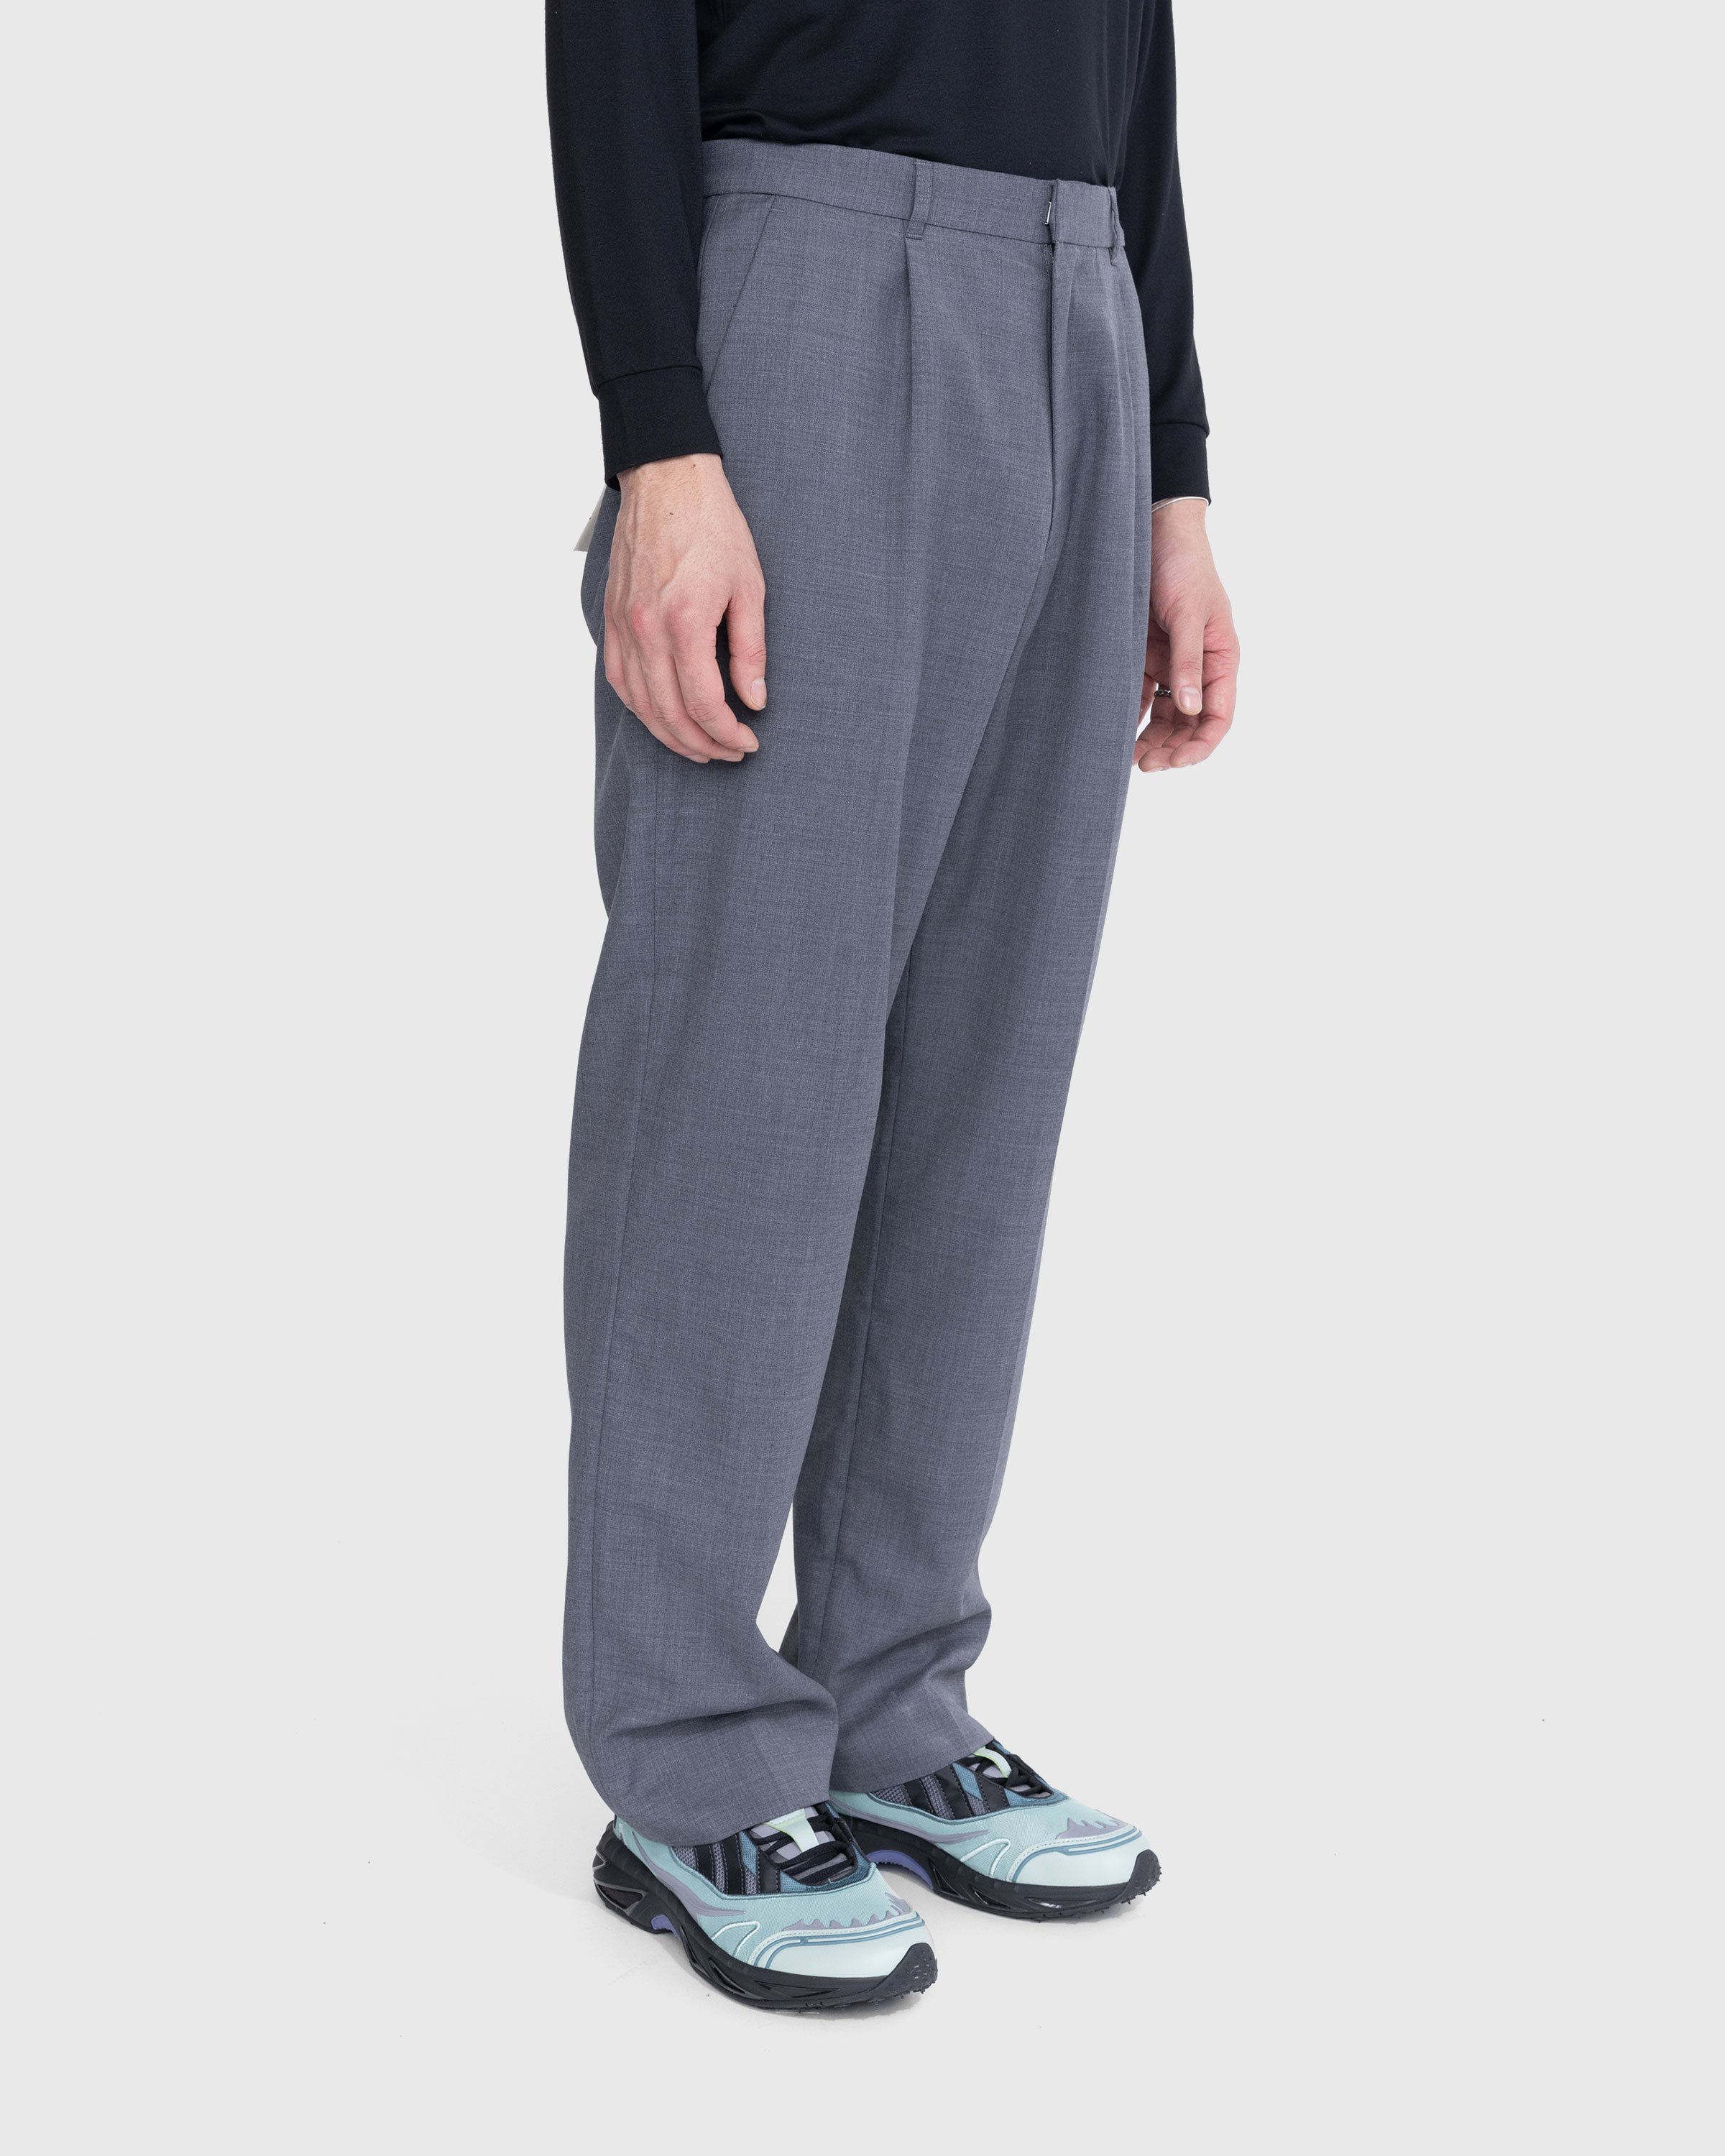 Highsnobiety - Tropical Wool Suiting Pants Grey - Clothing - Grey - Image 8